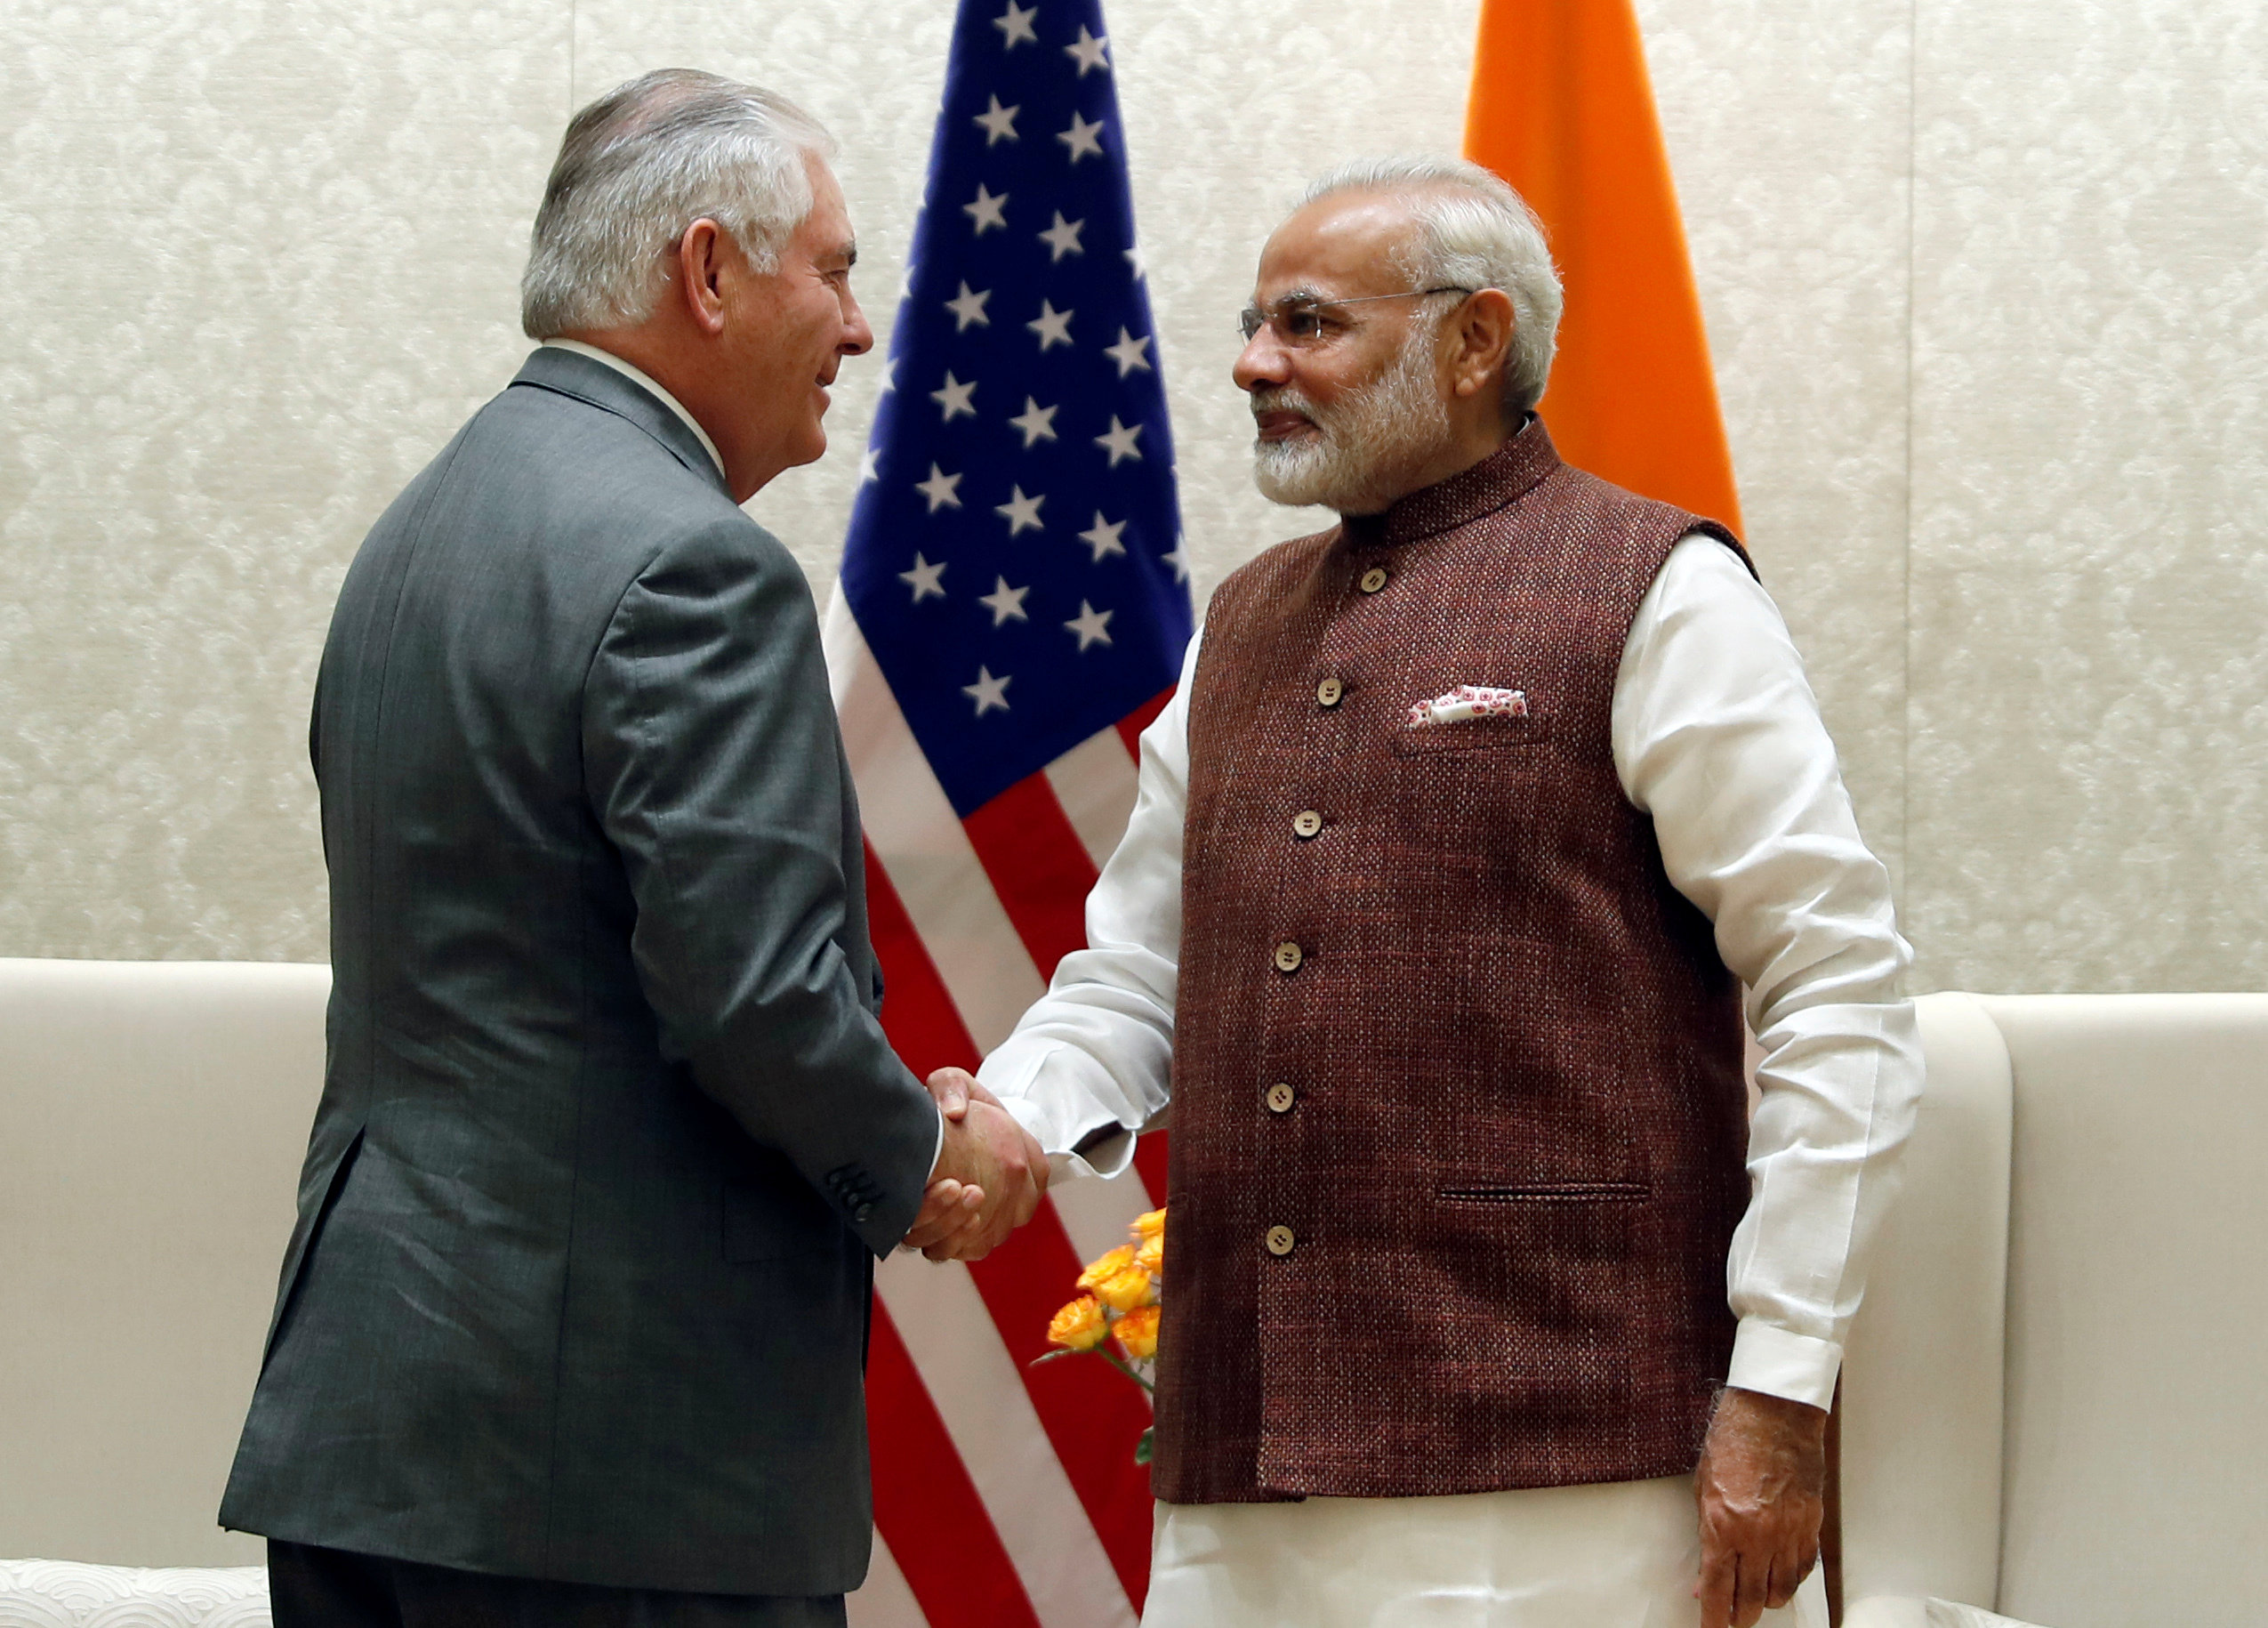 2017-10-25T115714Z_999405463_RC14F59A2670_RTRMADP_3_TILLERSON-ASIA-INDIA